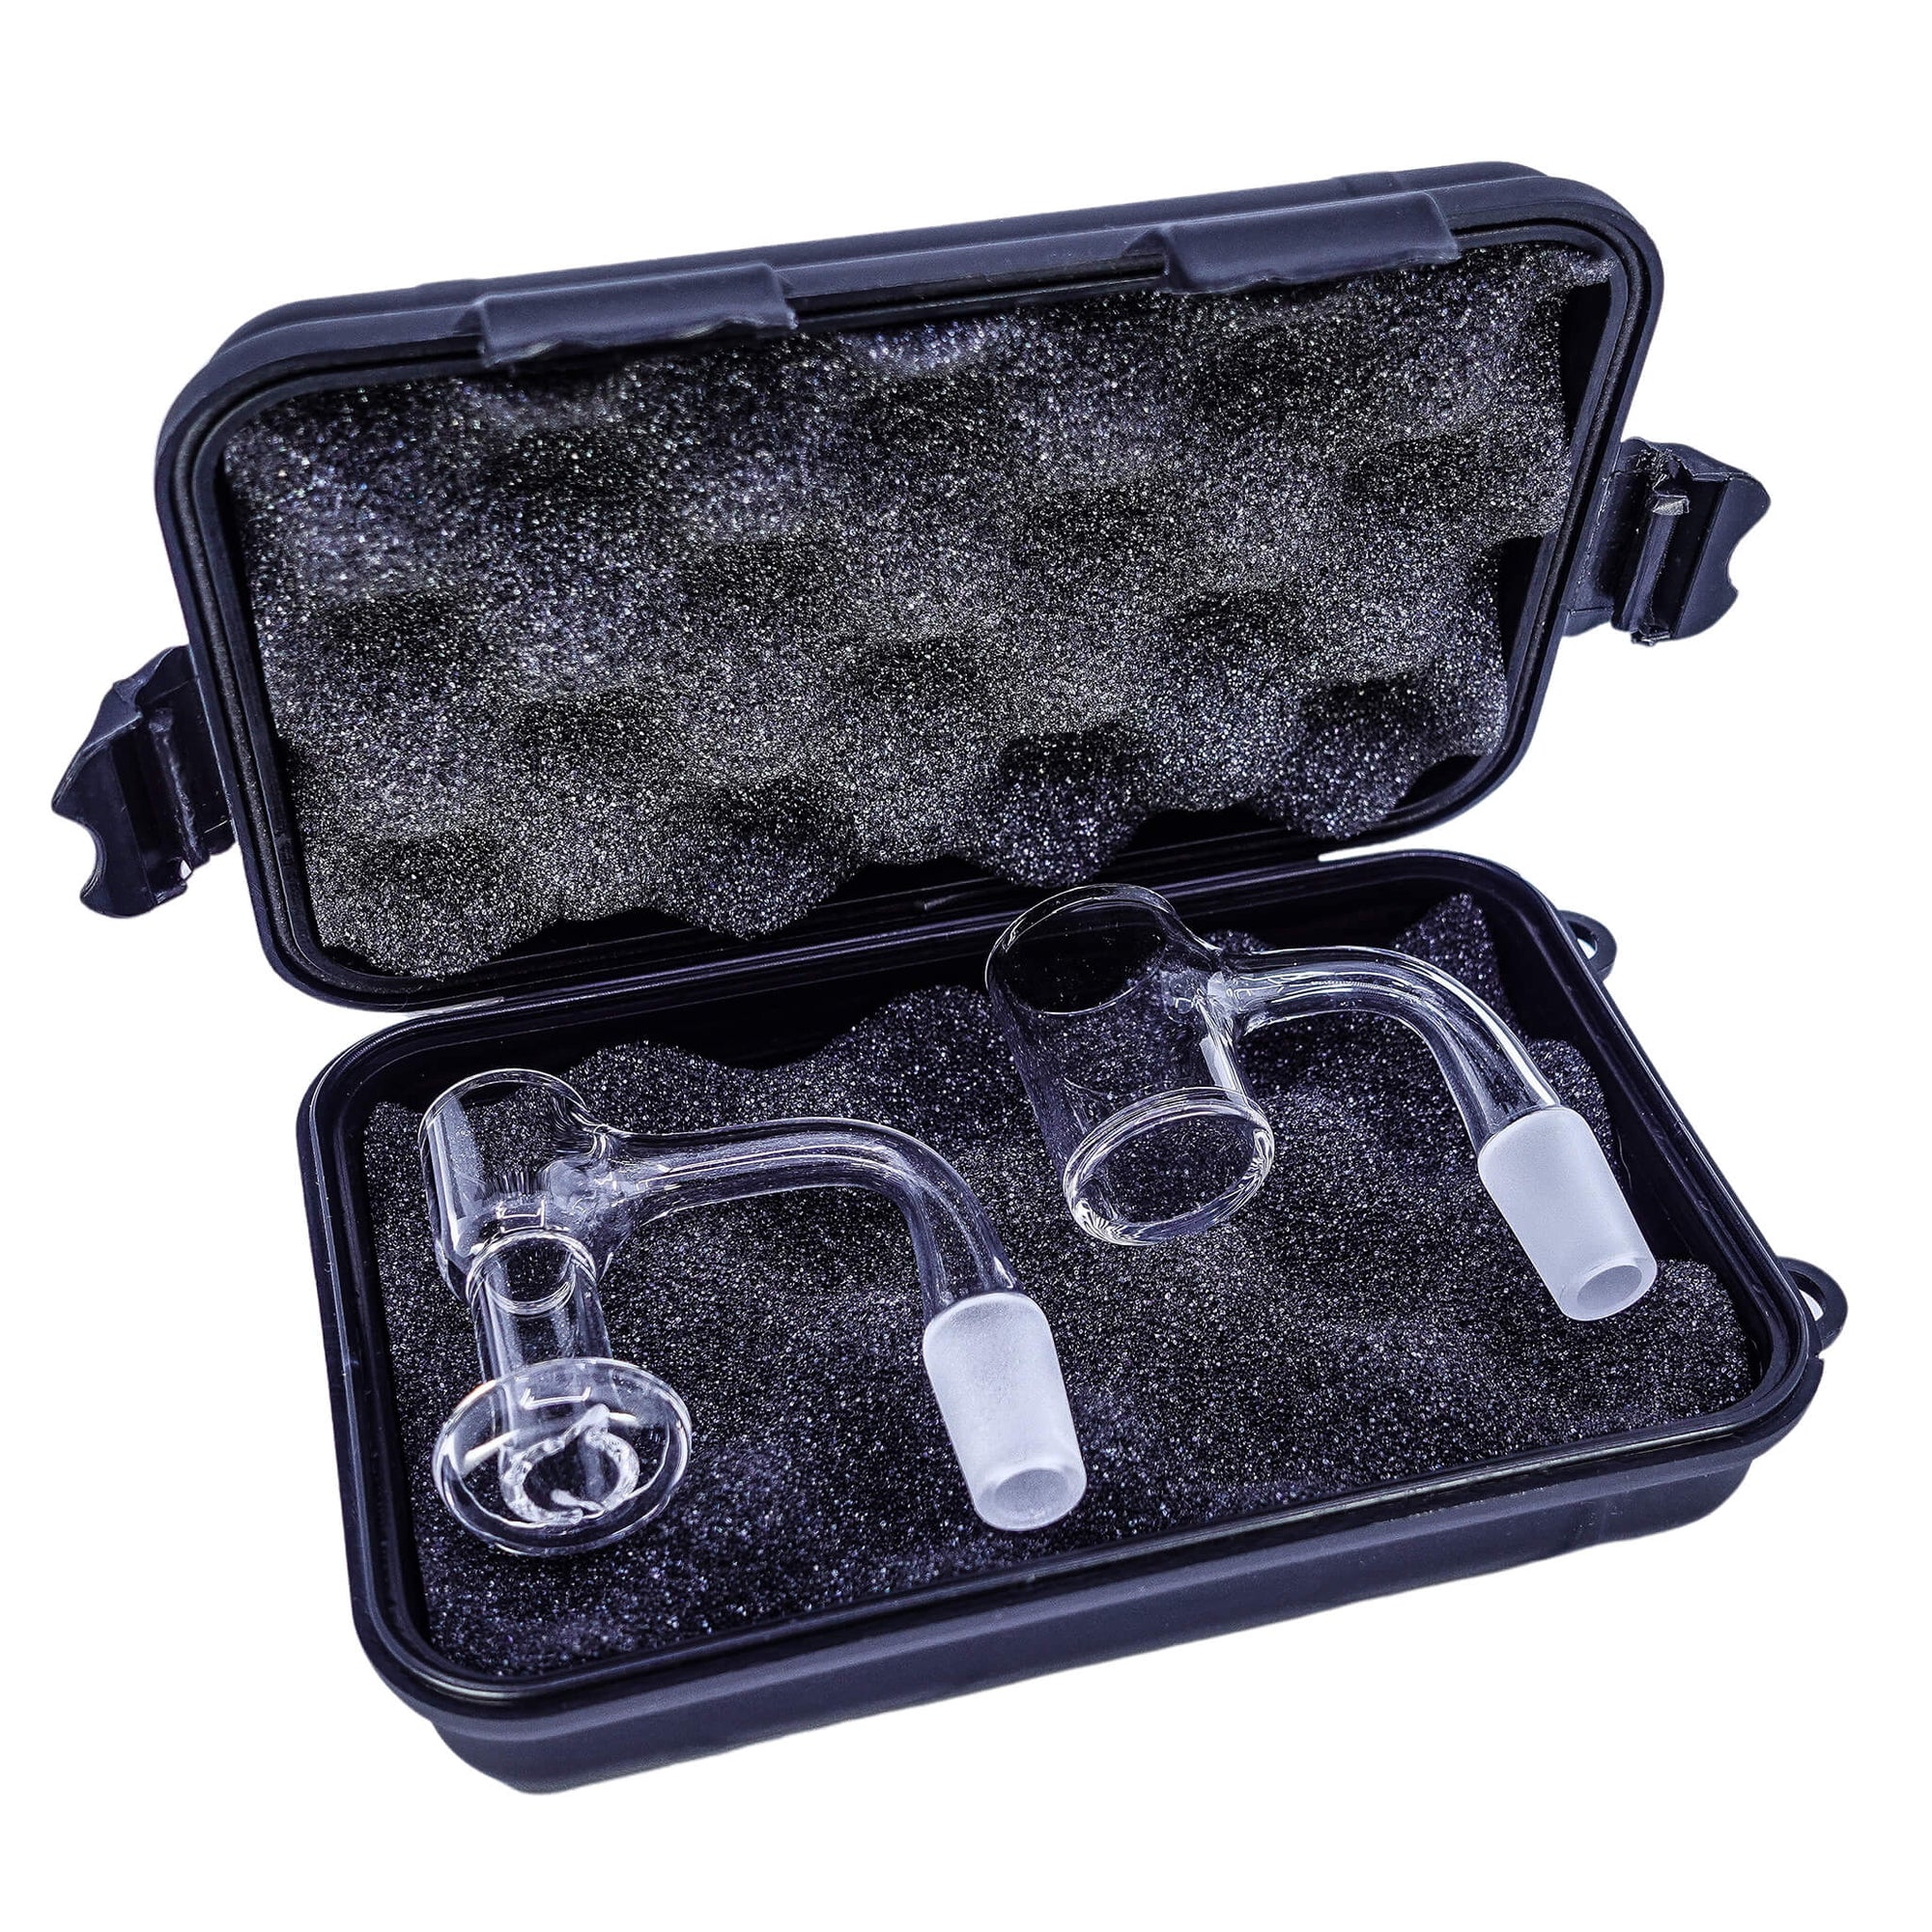 Hard Shell Protective Banger Case | Open Case Storing Two Quartz Bangers | the dabbing specialists